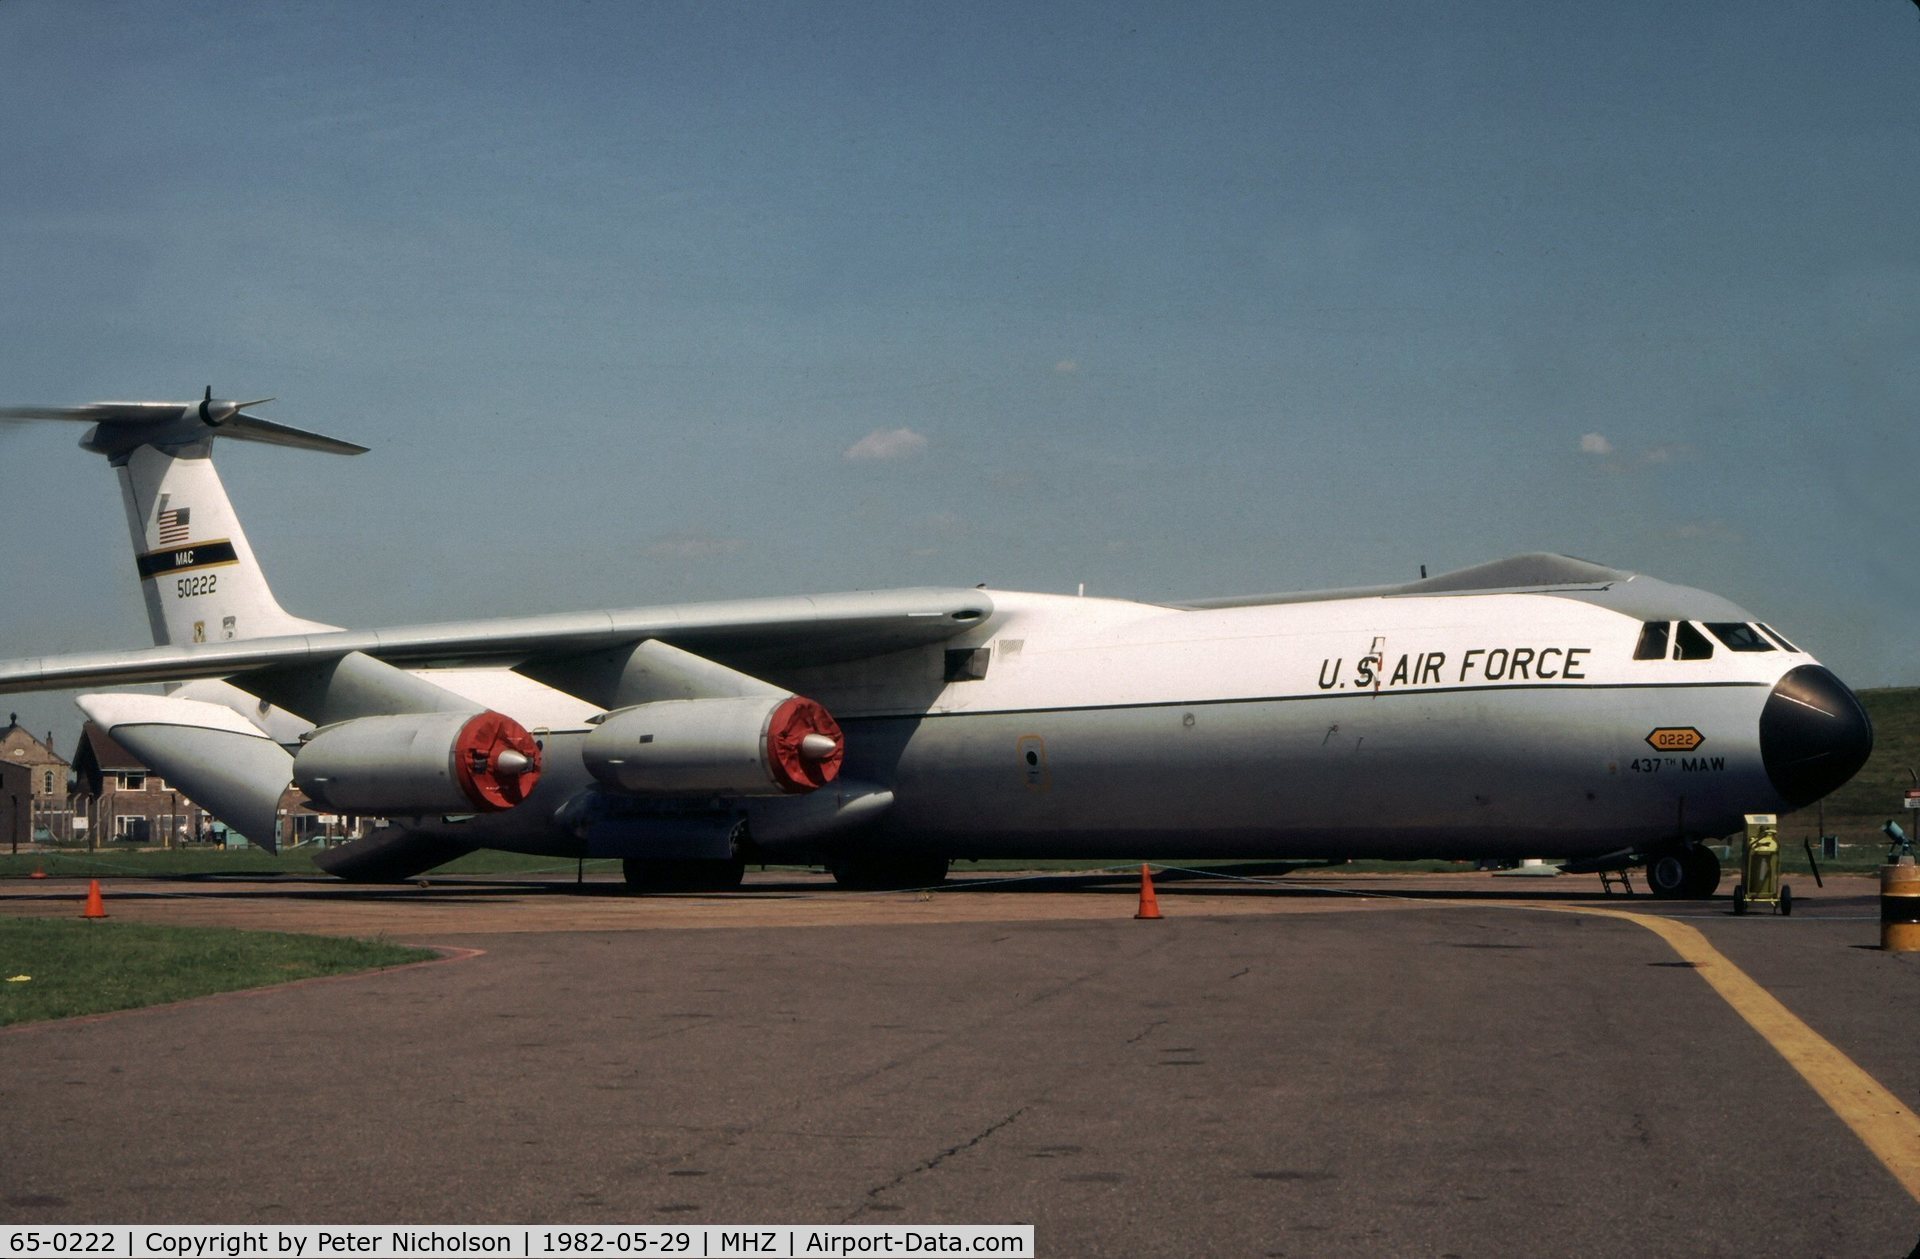 65-0222, 1965 Lockheed C-141B Starlifter C/N 300-6073, C-141B Starlifter of 437th Military Air Wing on display at the 1982 Mildenhall Air Fete.